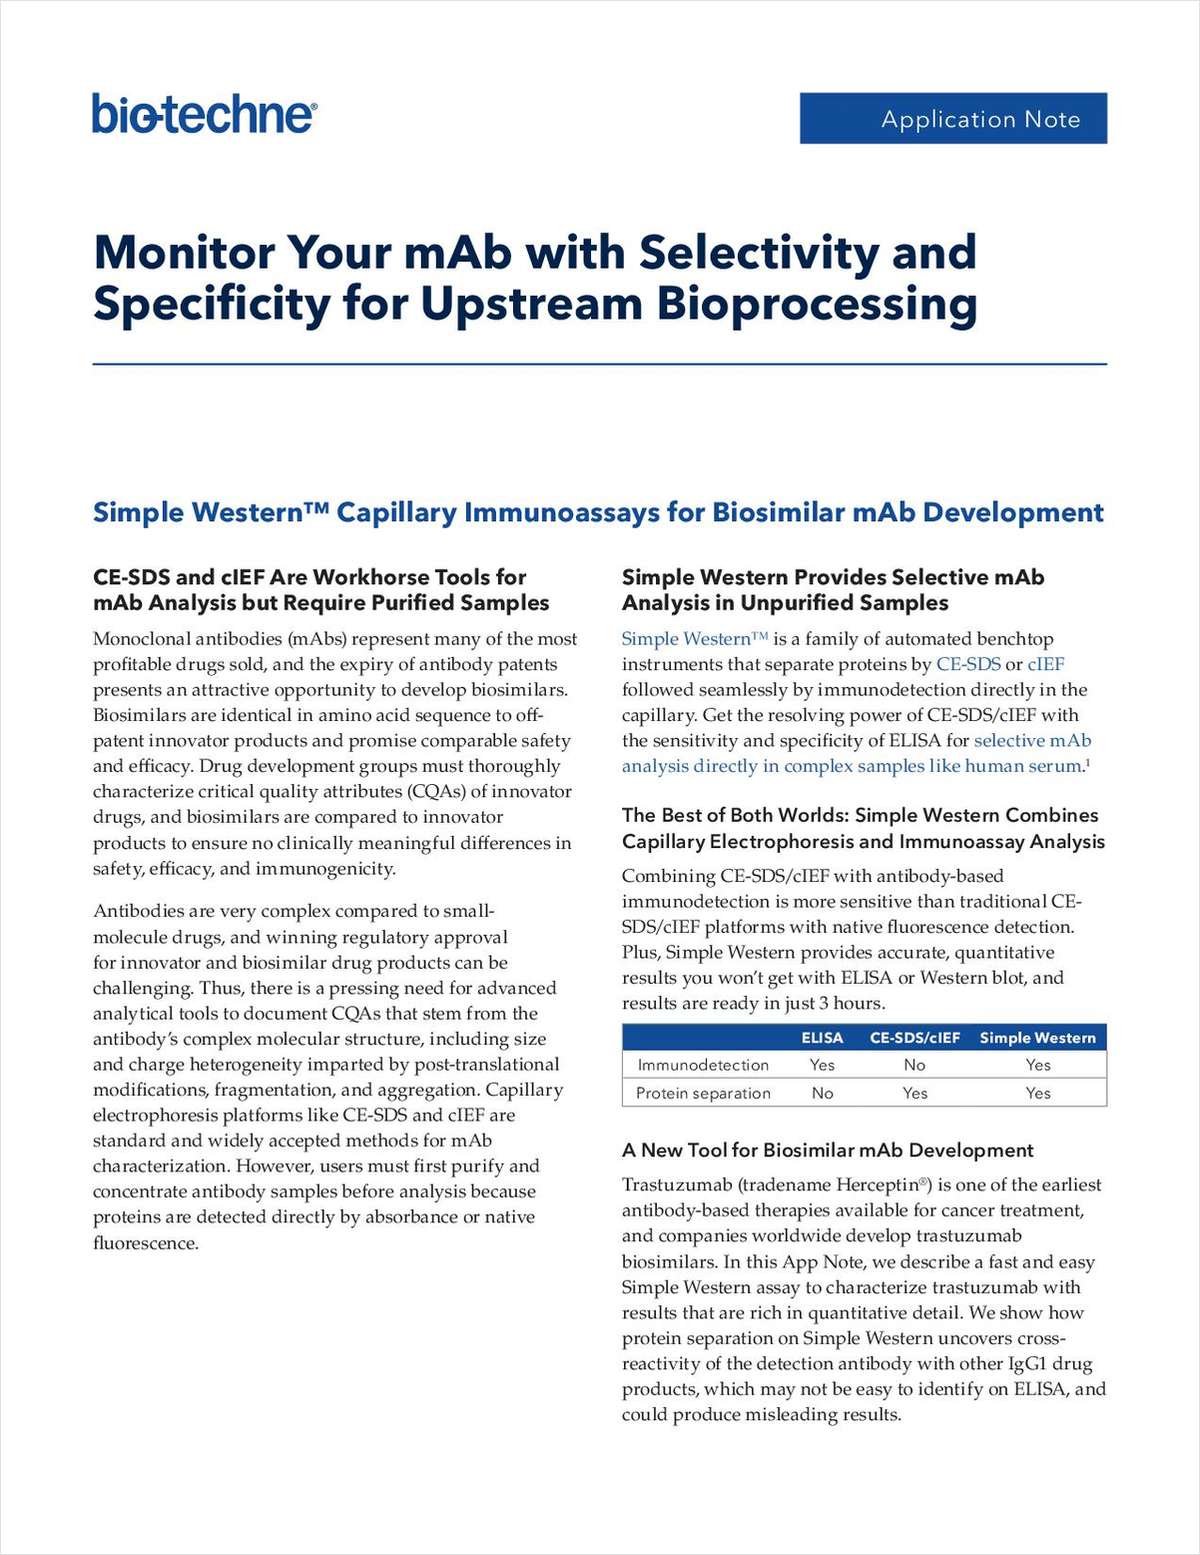 Monitor Your mAb with Selectivity and Specificity for Upstream Bioprocessing